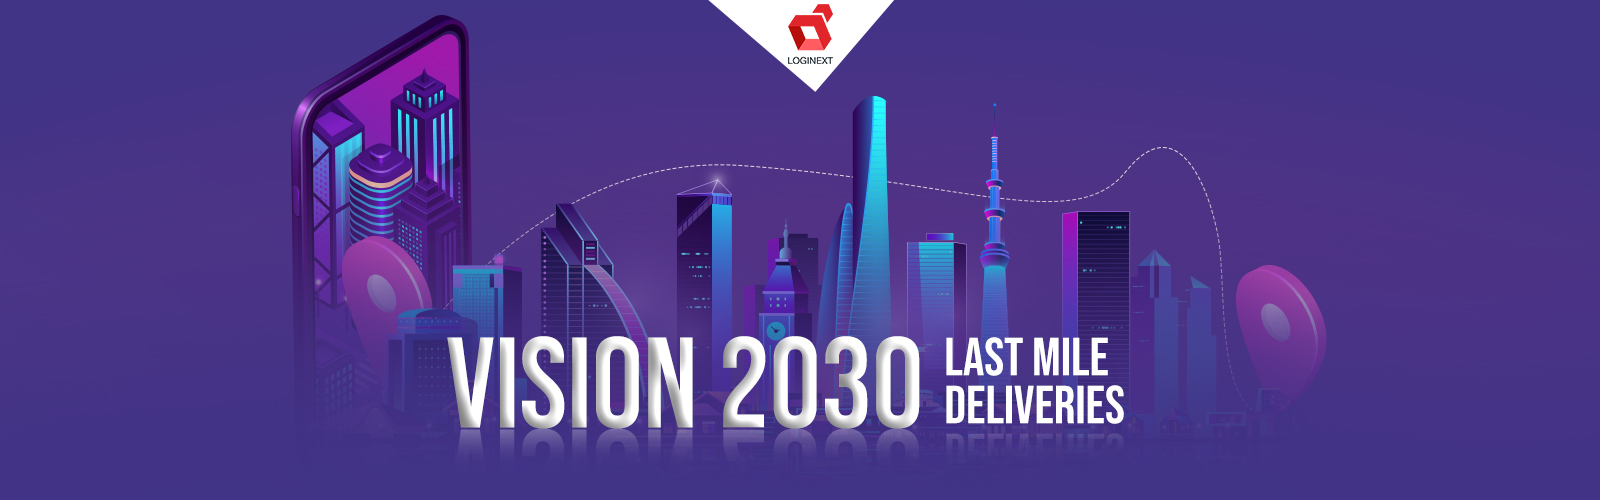 The Past, Present & Future of Last Mile Deliveries: Vision for 2030